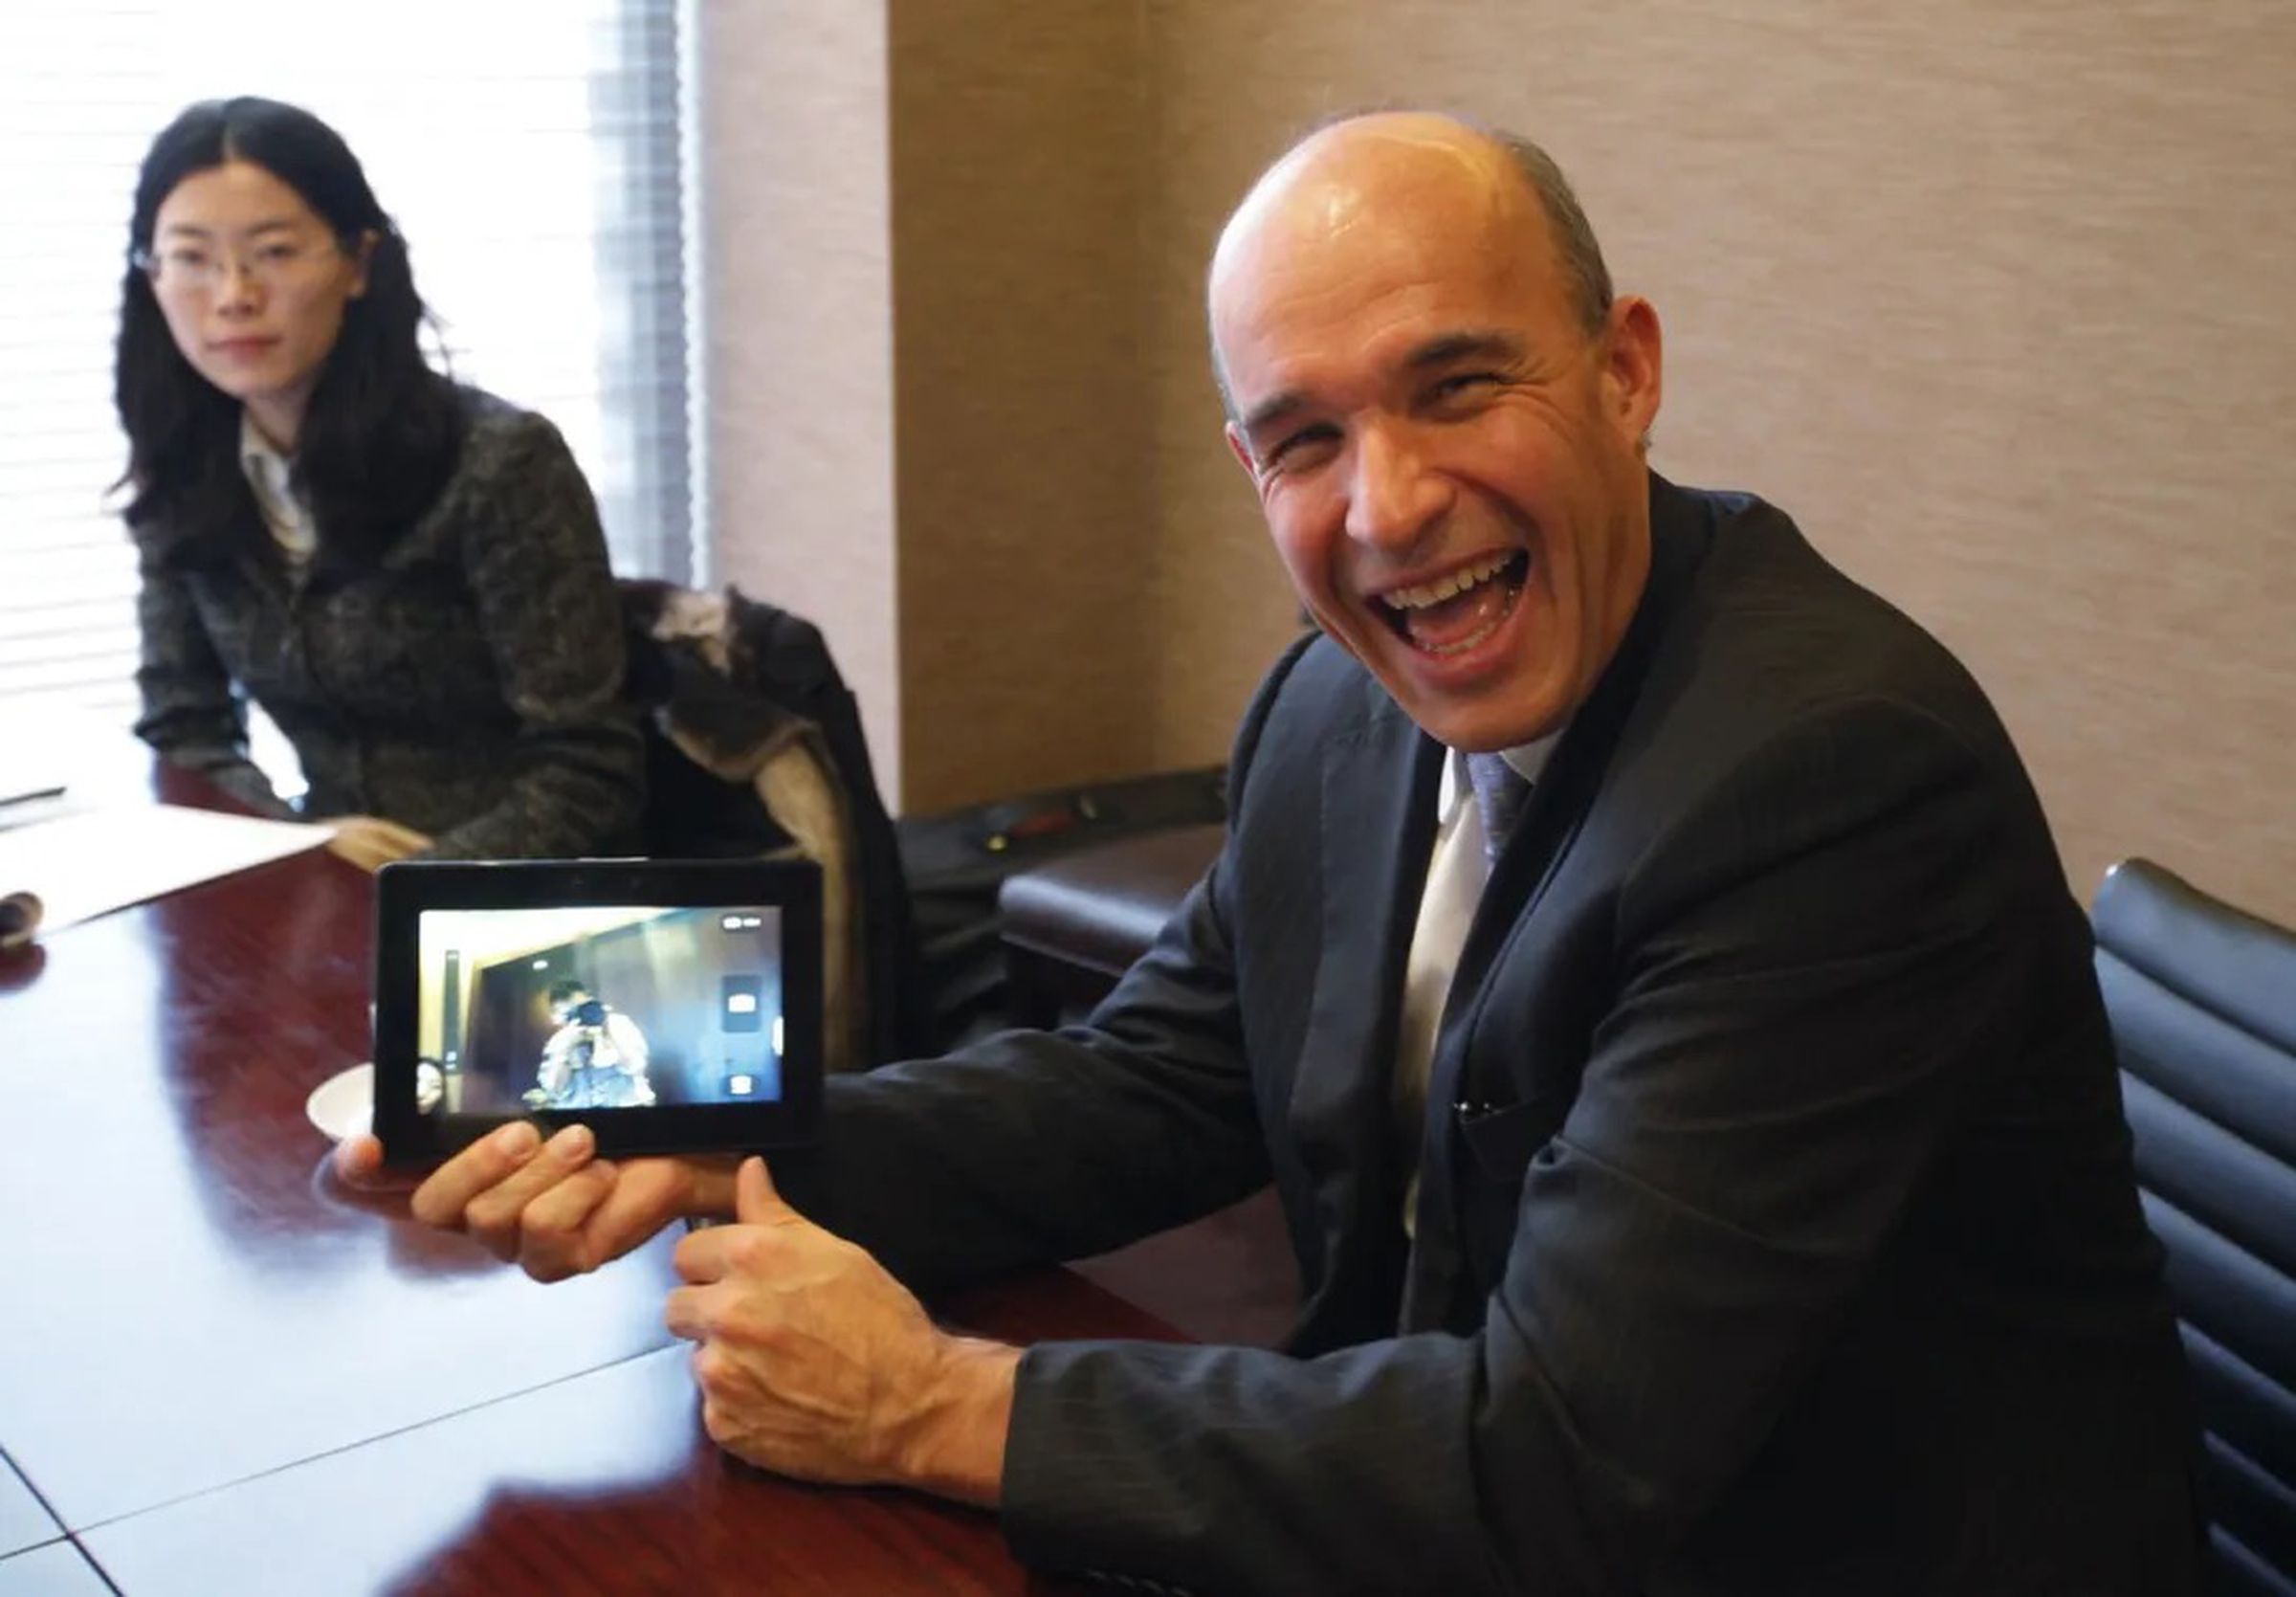 Former BlackBerry co-CEO Jim Balsillie was very excited for the Playbook, a tablet you either never heard of or forgot about at least a decade ago.